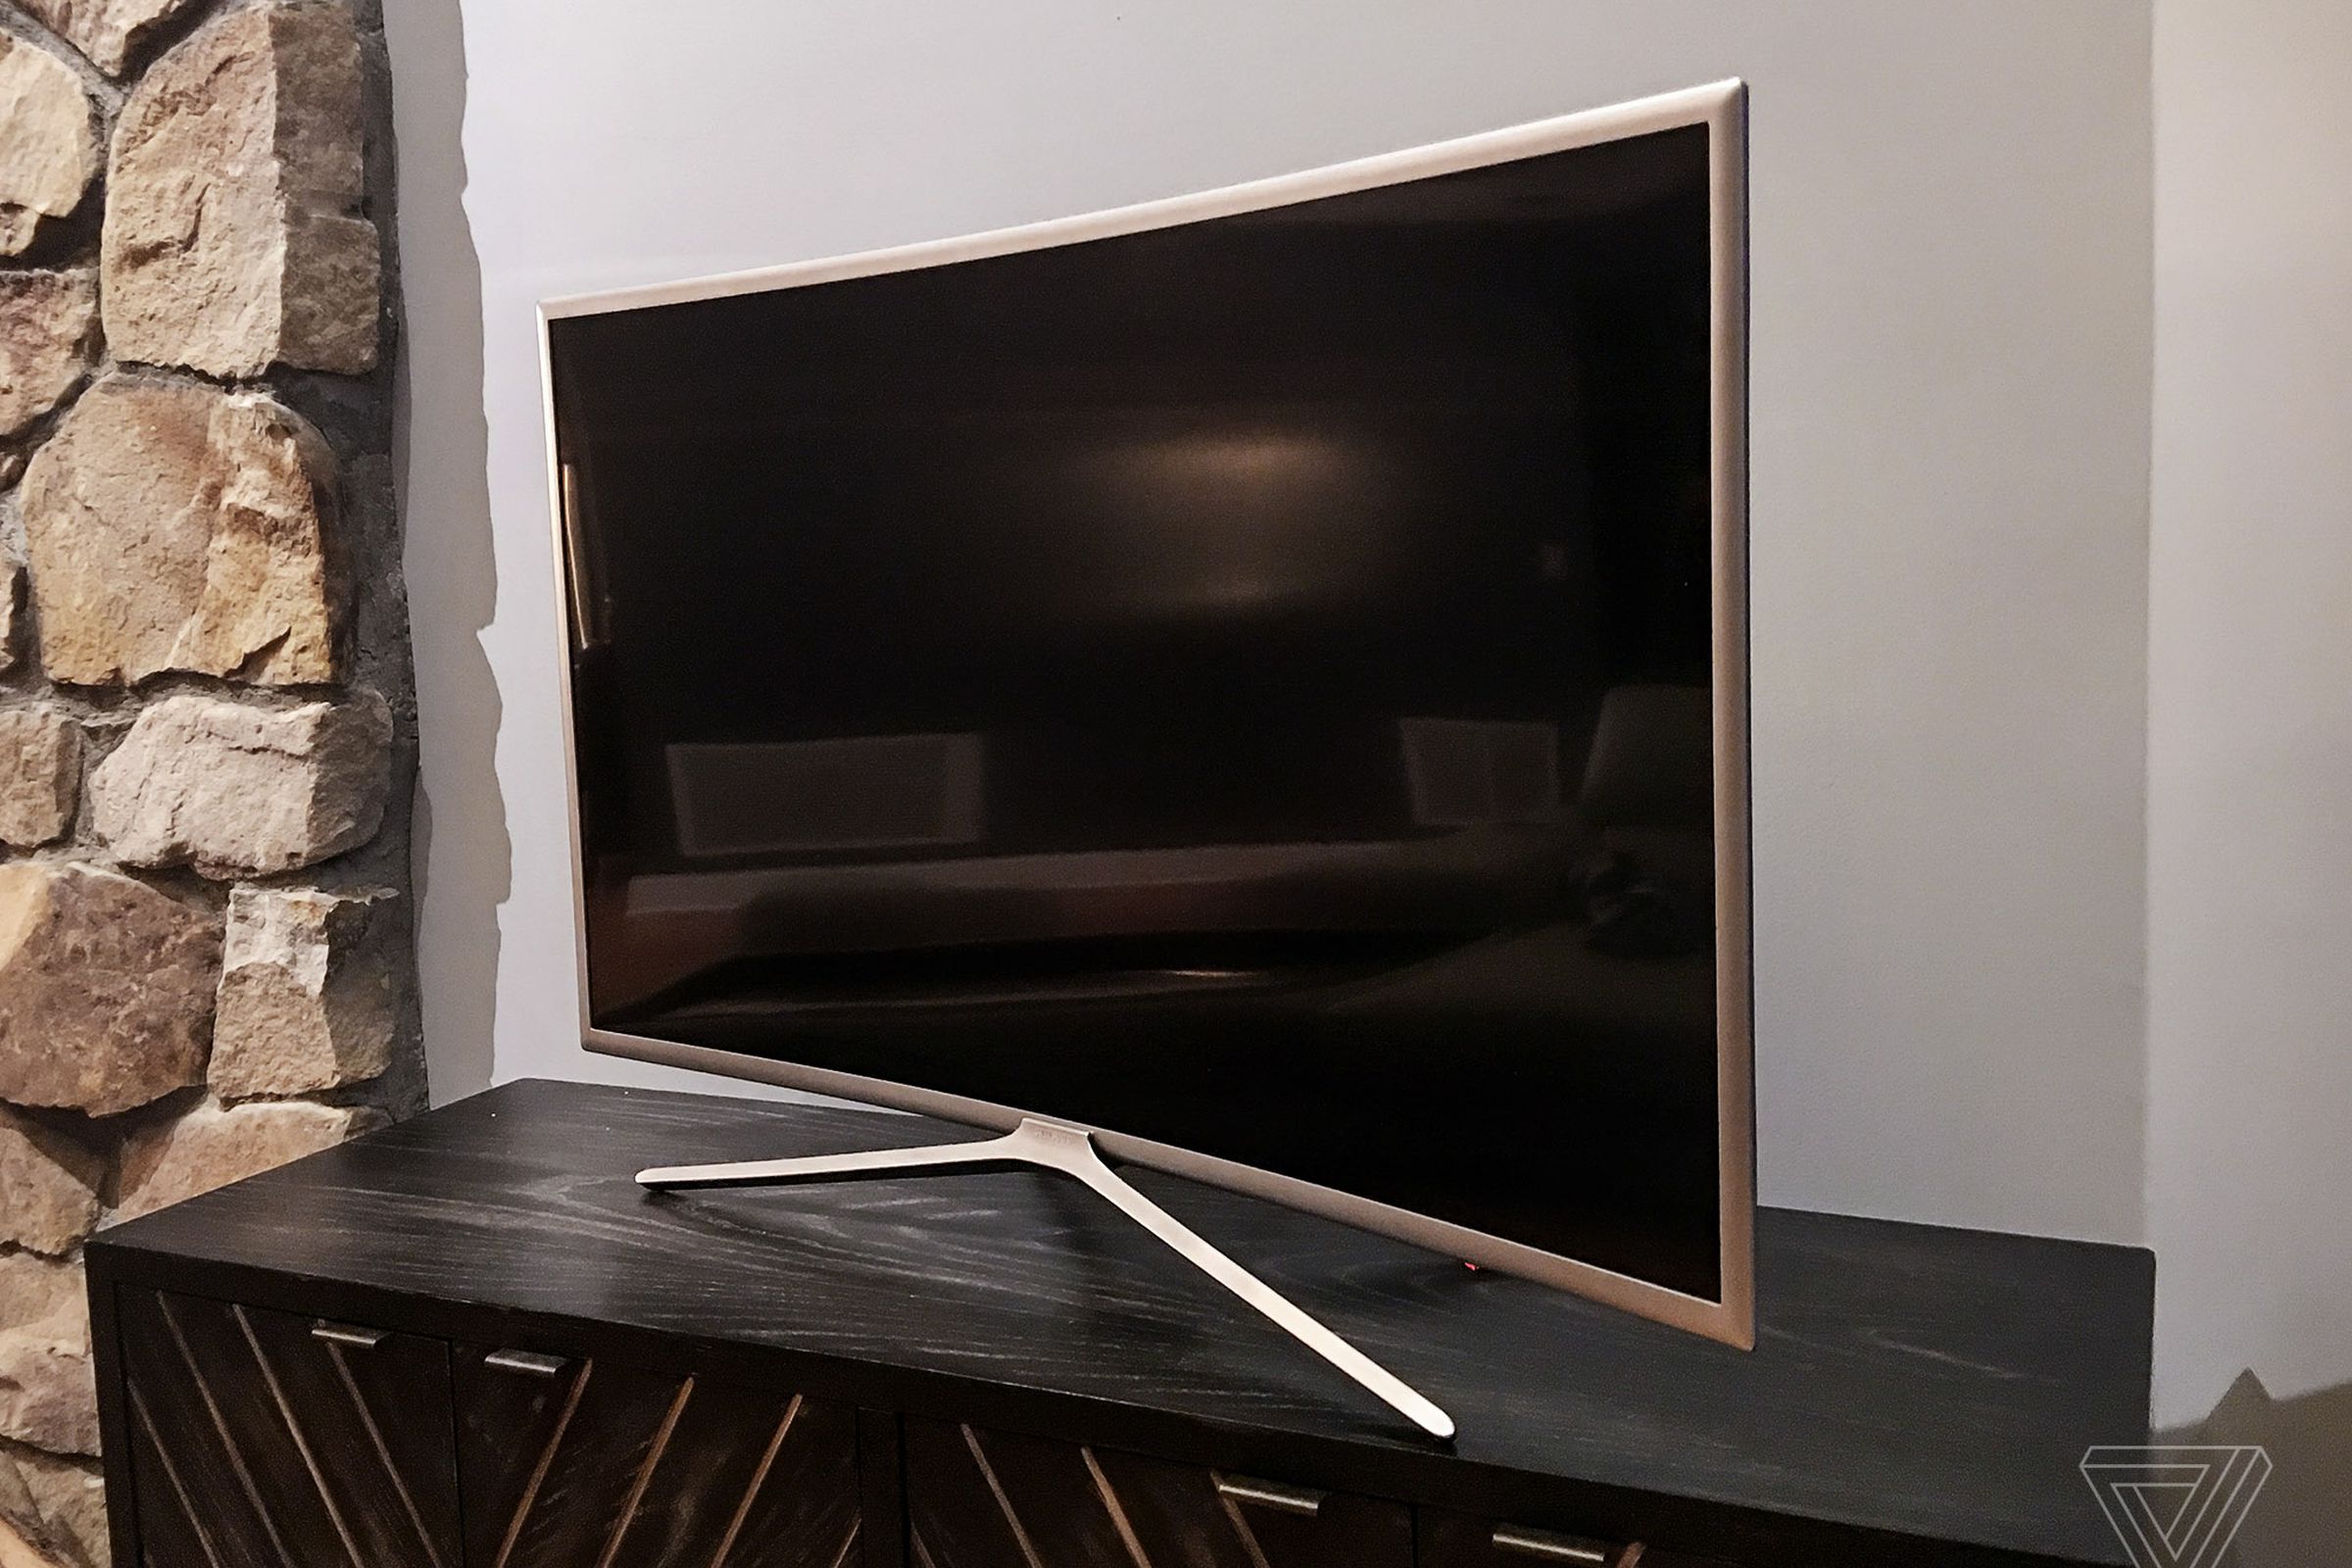 A photo of our terrible Samsung 6-Series TV